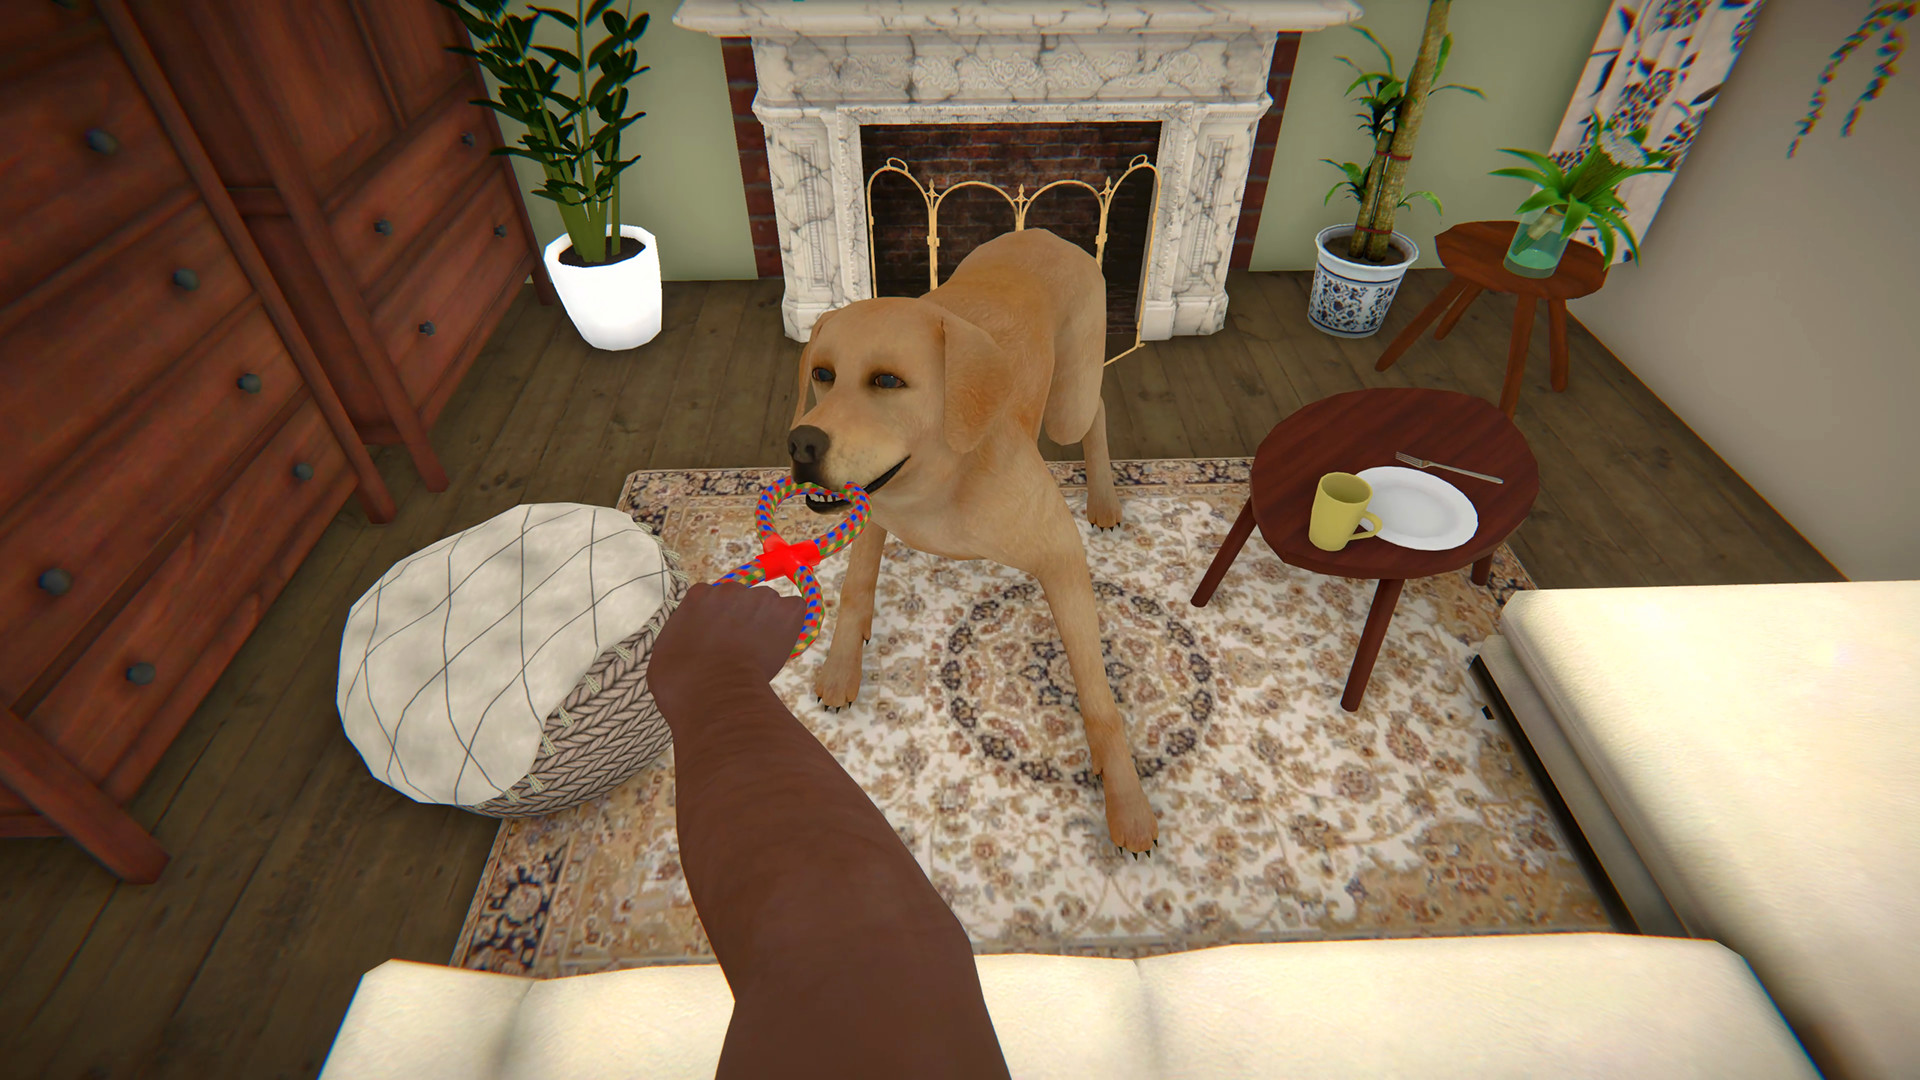  House Flipper is getting pets, because why not 